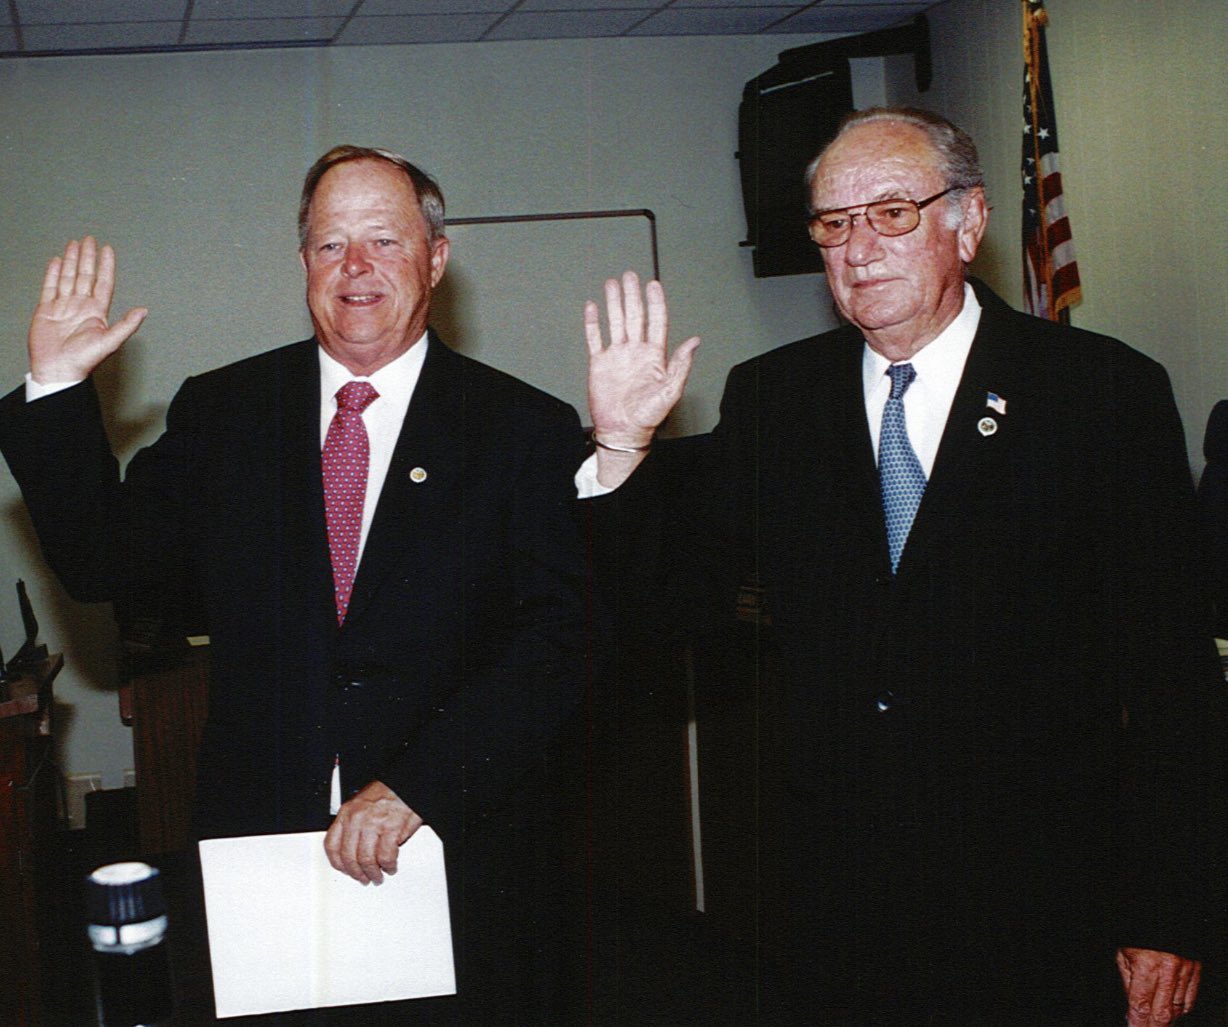 Former Miami Springs City Councilman Eric Elza (left) and former Miami Springs City Councilman Jim Caudle (right) at swearing in ceremony (Photo credit:  City of Miami Springs)